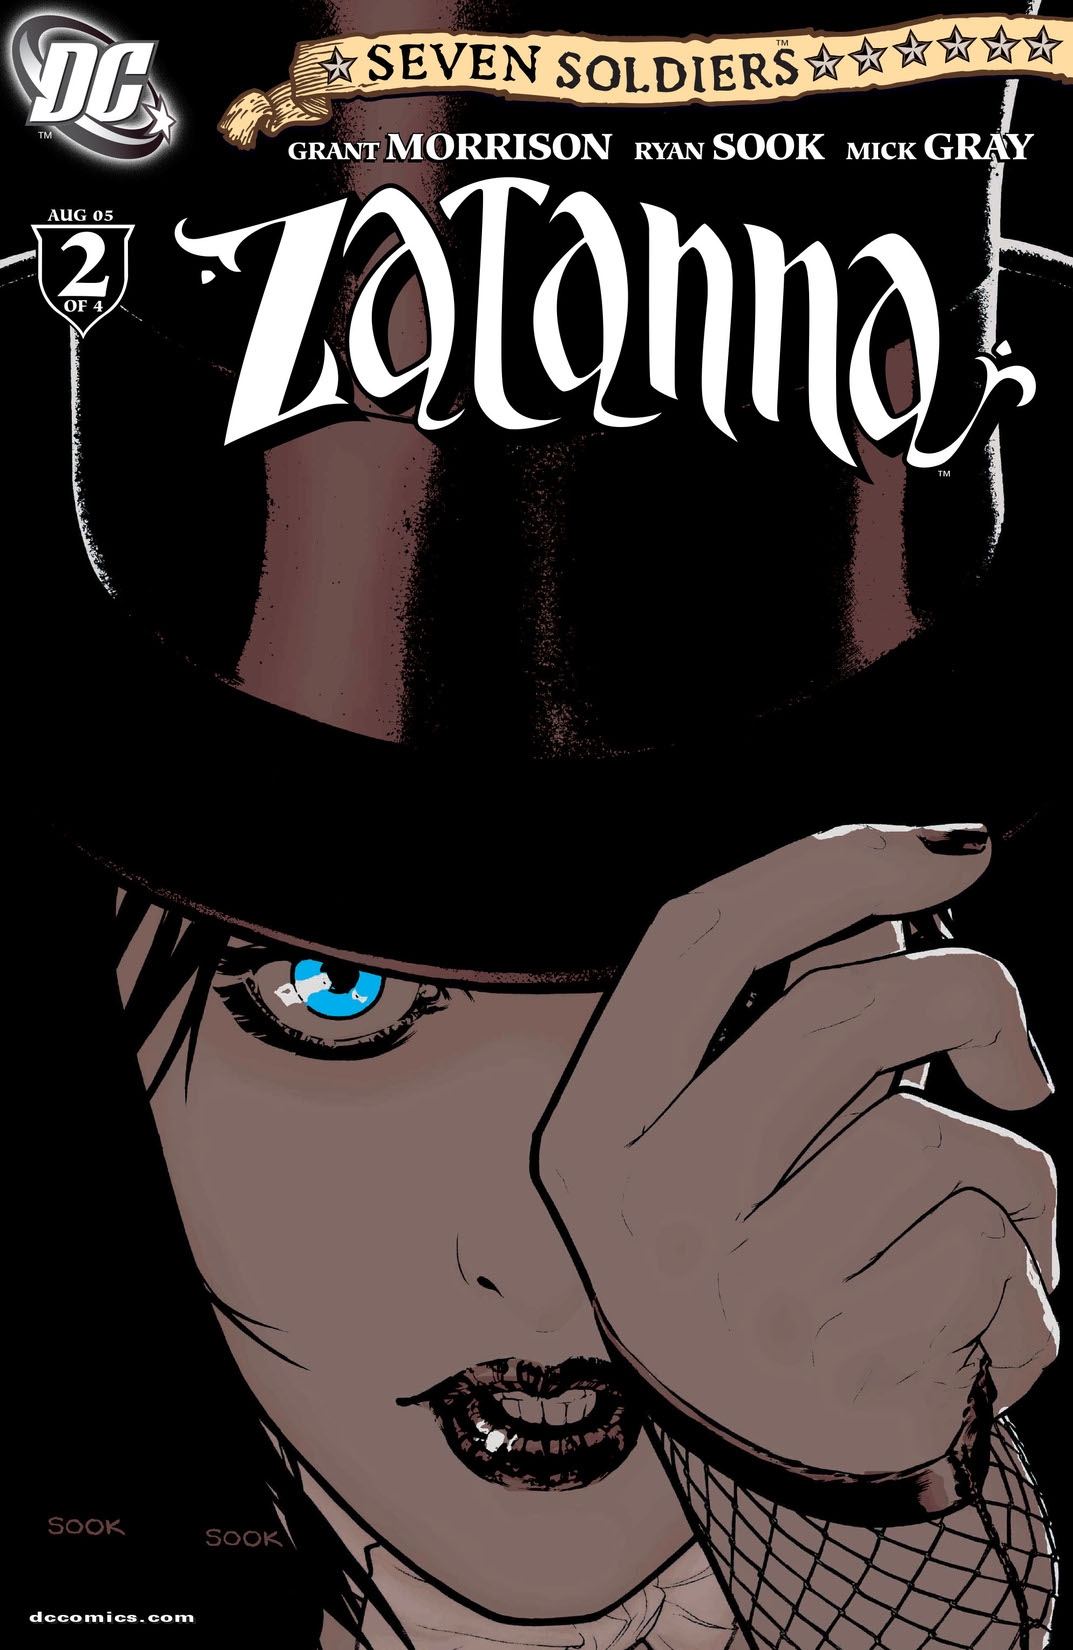 Seven Soldiers: Zatanna #2 preview images